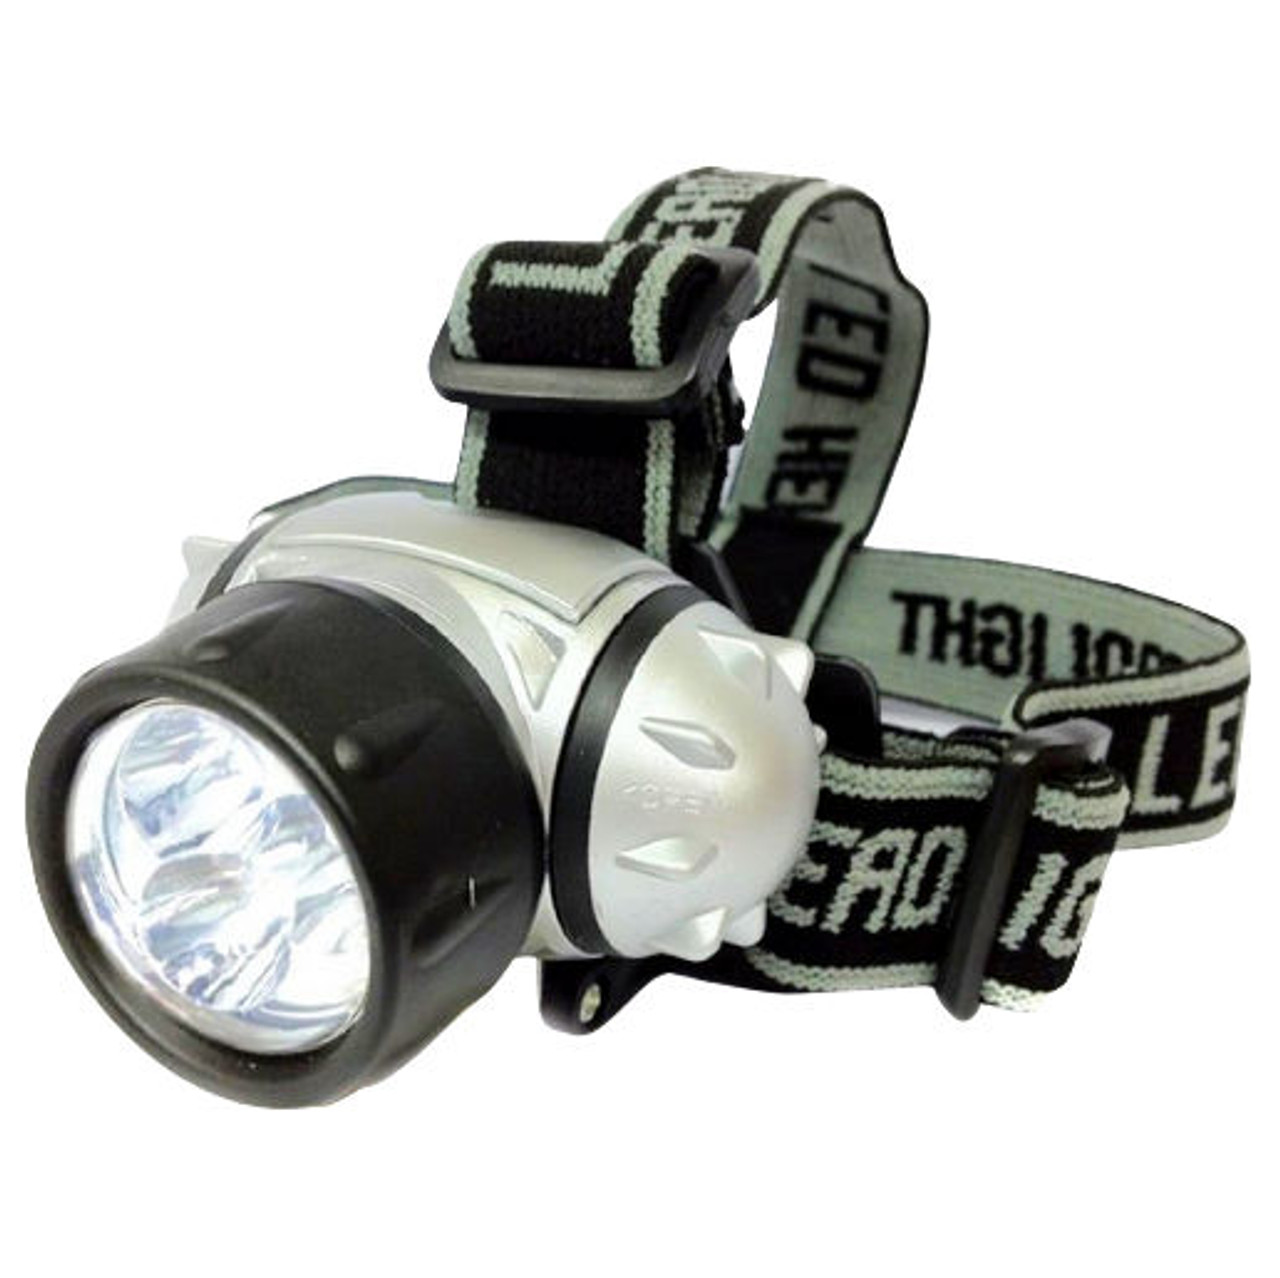 Clulite 3 LED Head Light Torch HL16 Clearance Price